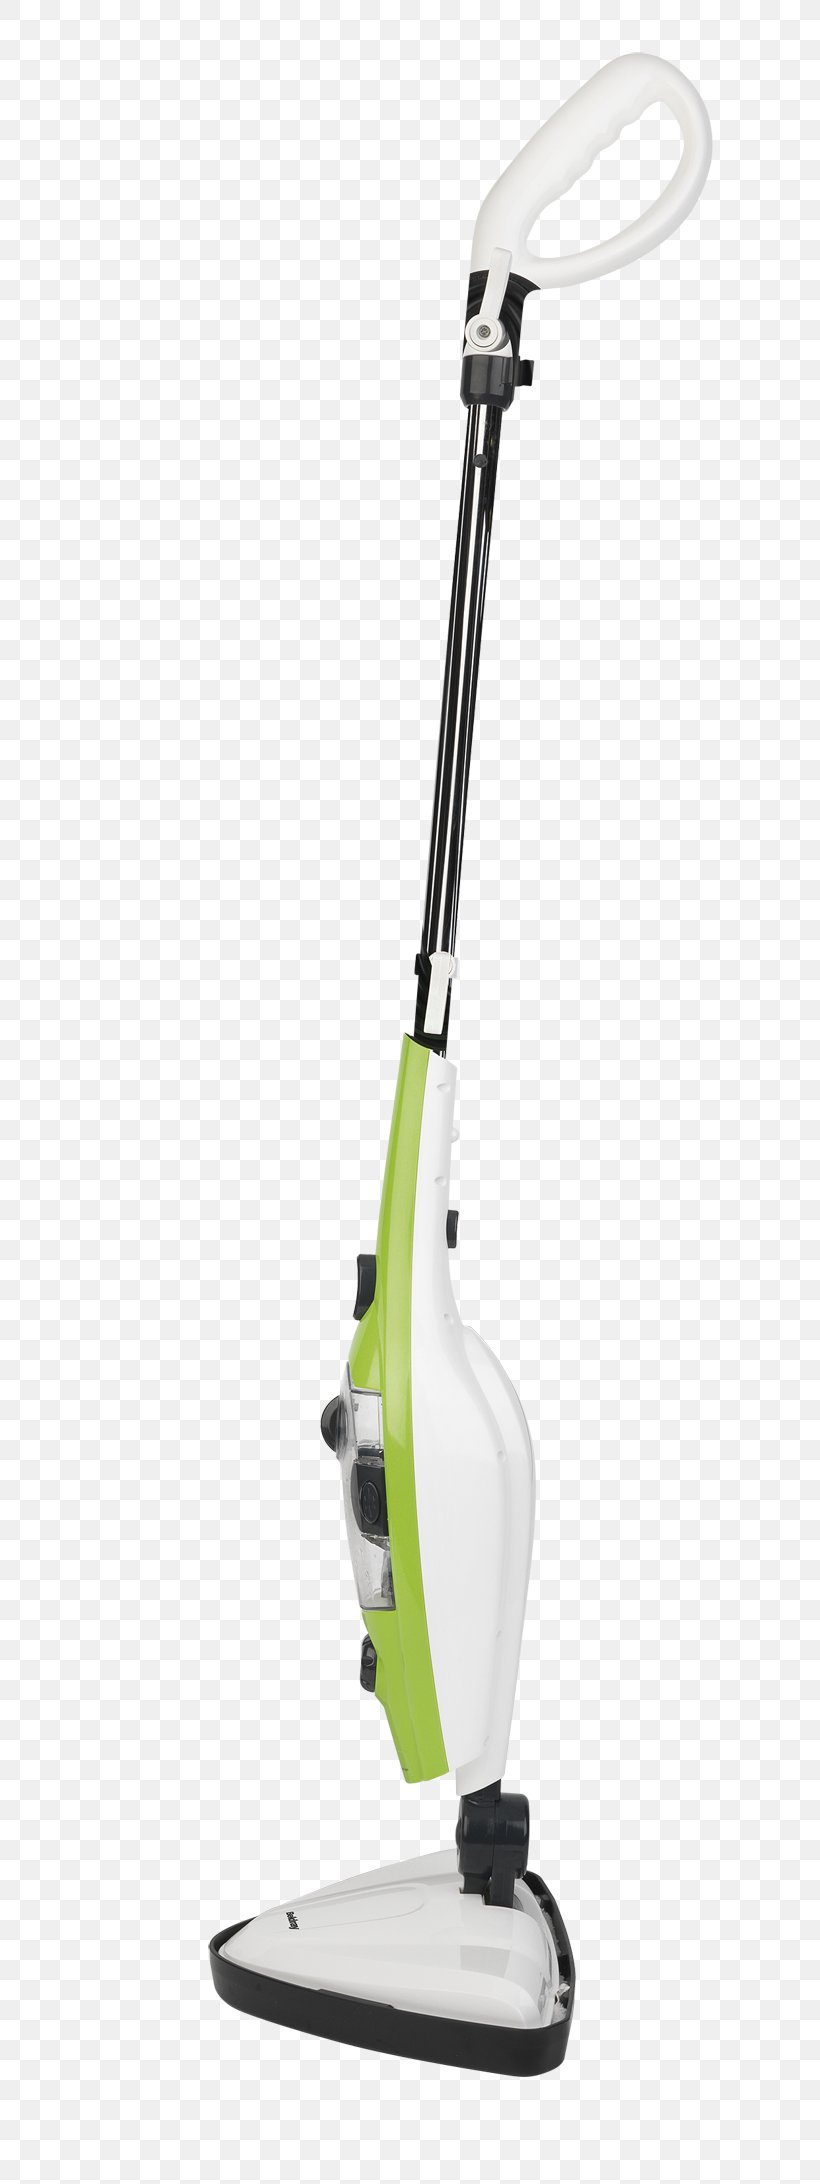 Tool Steam Mop Vacuum Cleaner Vapor Steam Cleaner, PNG, 781x2184px, Tool, Broom, Carpet, Cleaner, Cleaning Download Free